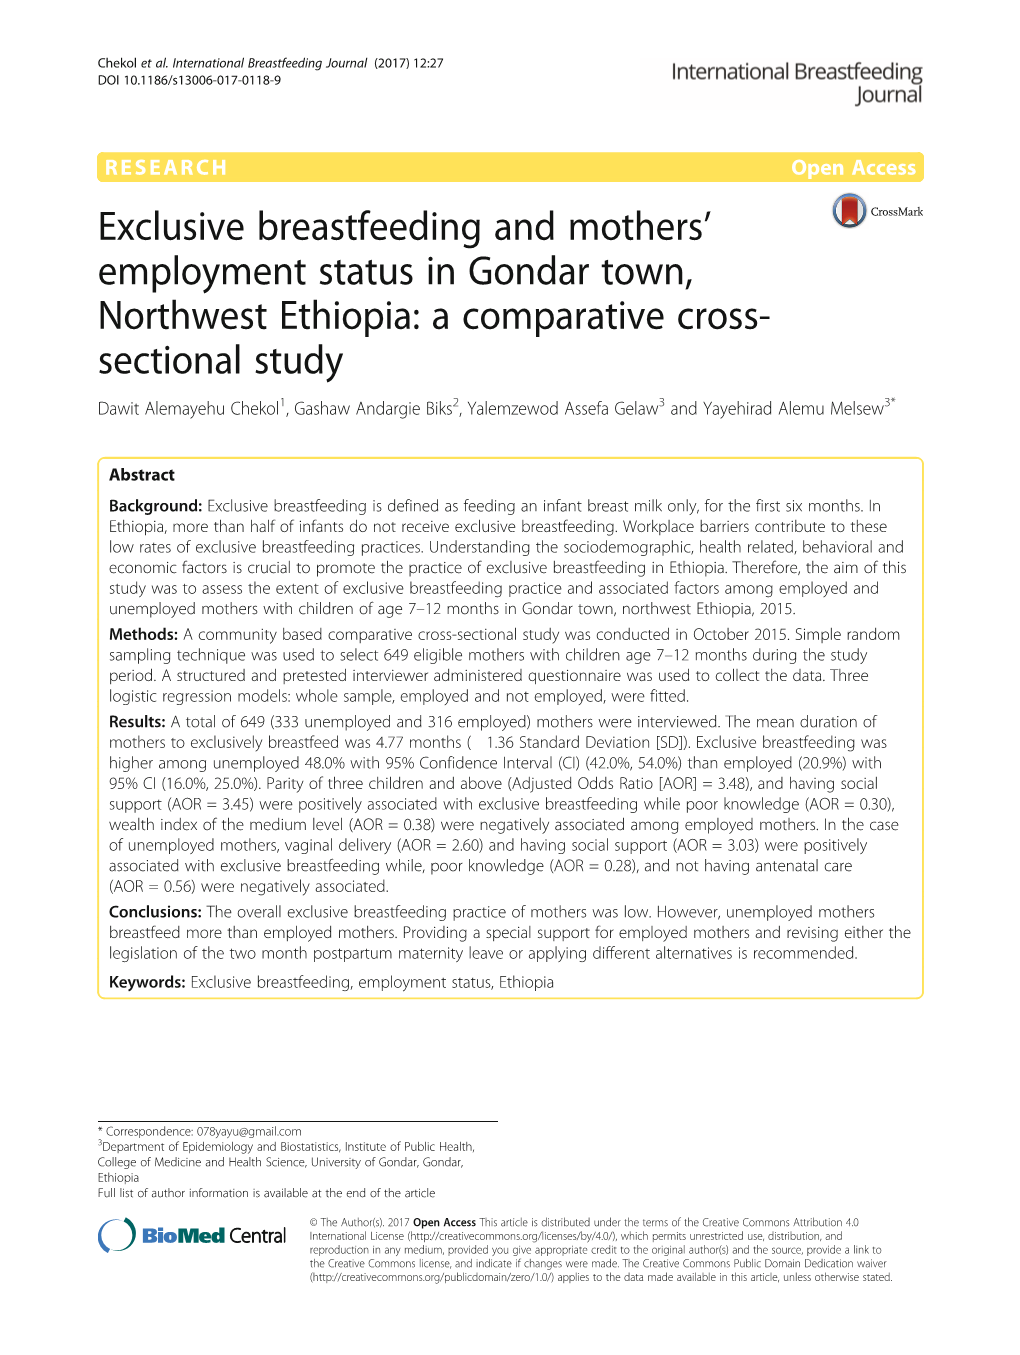 Exclusive Breastfeeding and Mothers' Employment Status in Gondar Town